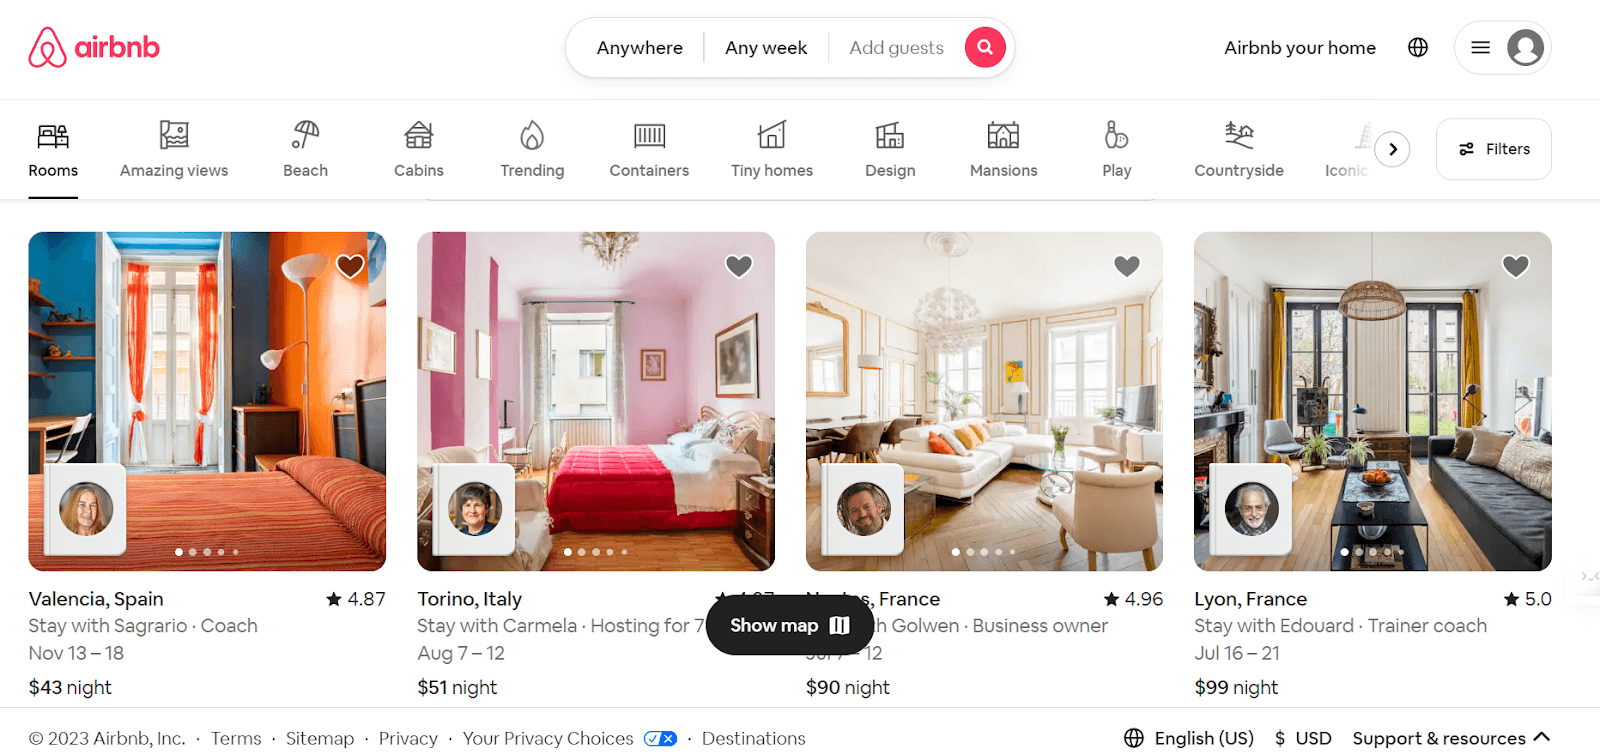 Airbnb vs Hotels Which is Better Image 4